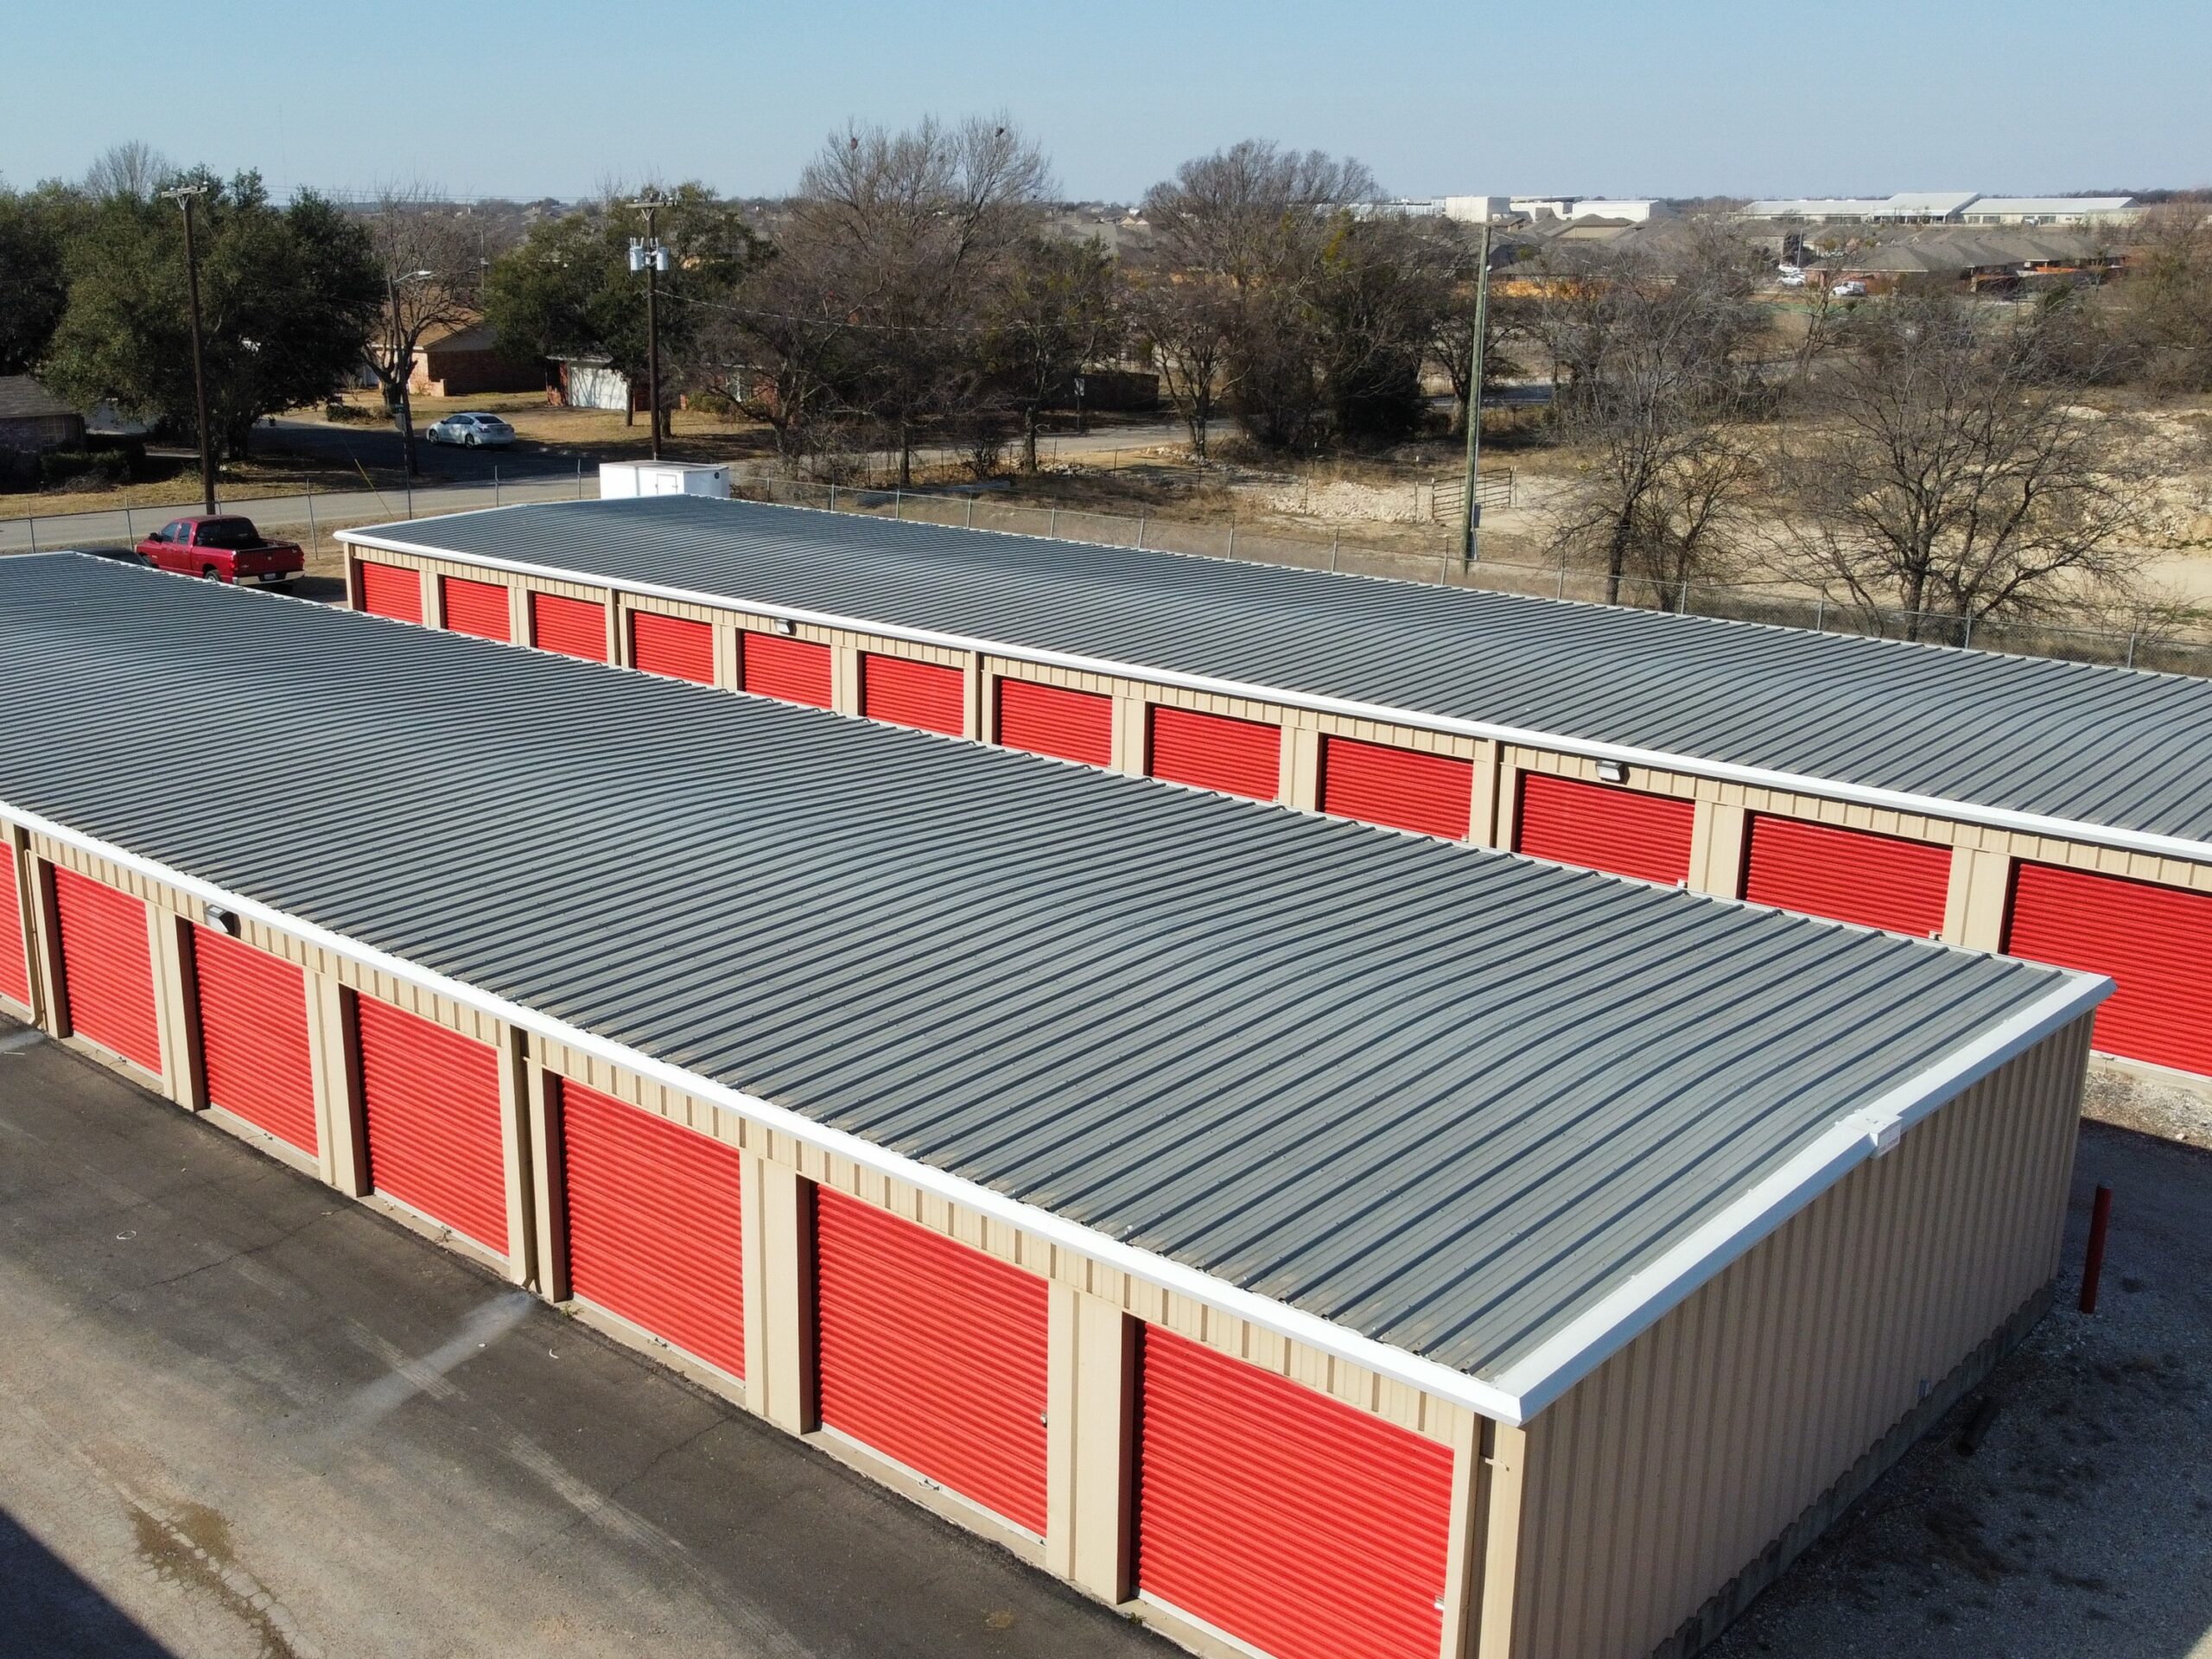 Pack & Stack Storage- Self Storage Facility For Sale by The Karr Self Storage Team